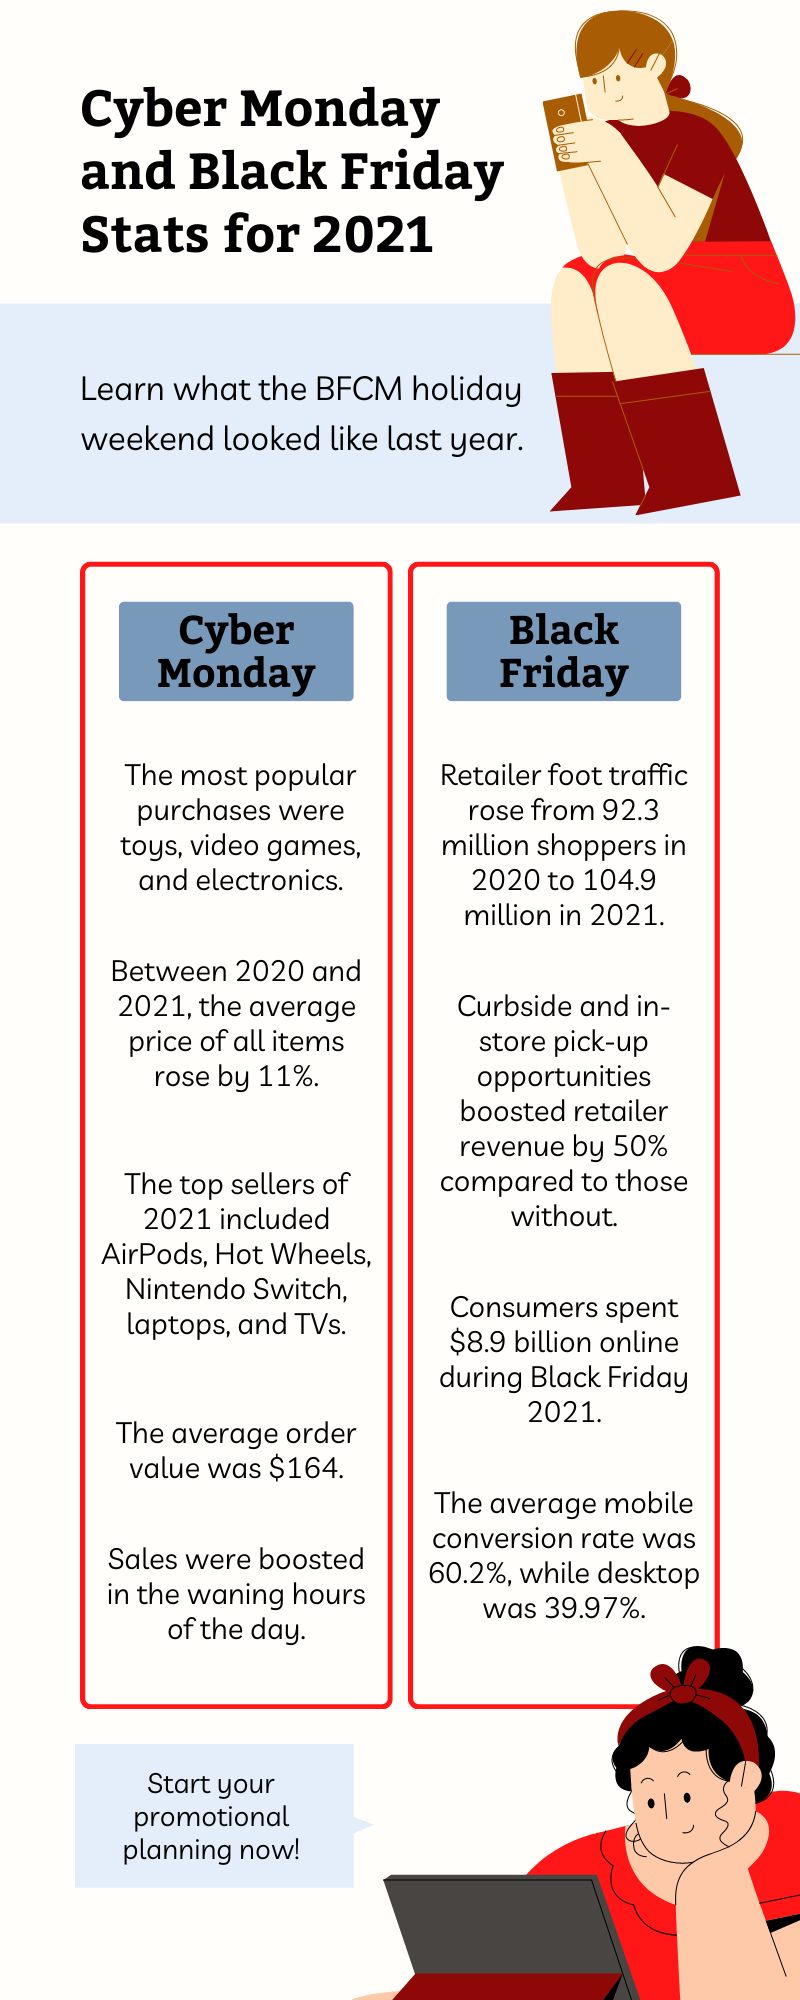 Cyber Monday and Black Friday Stats for 2021